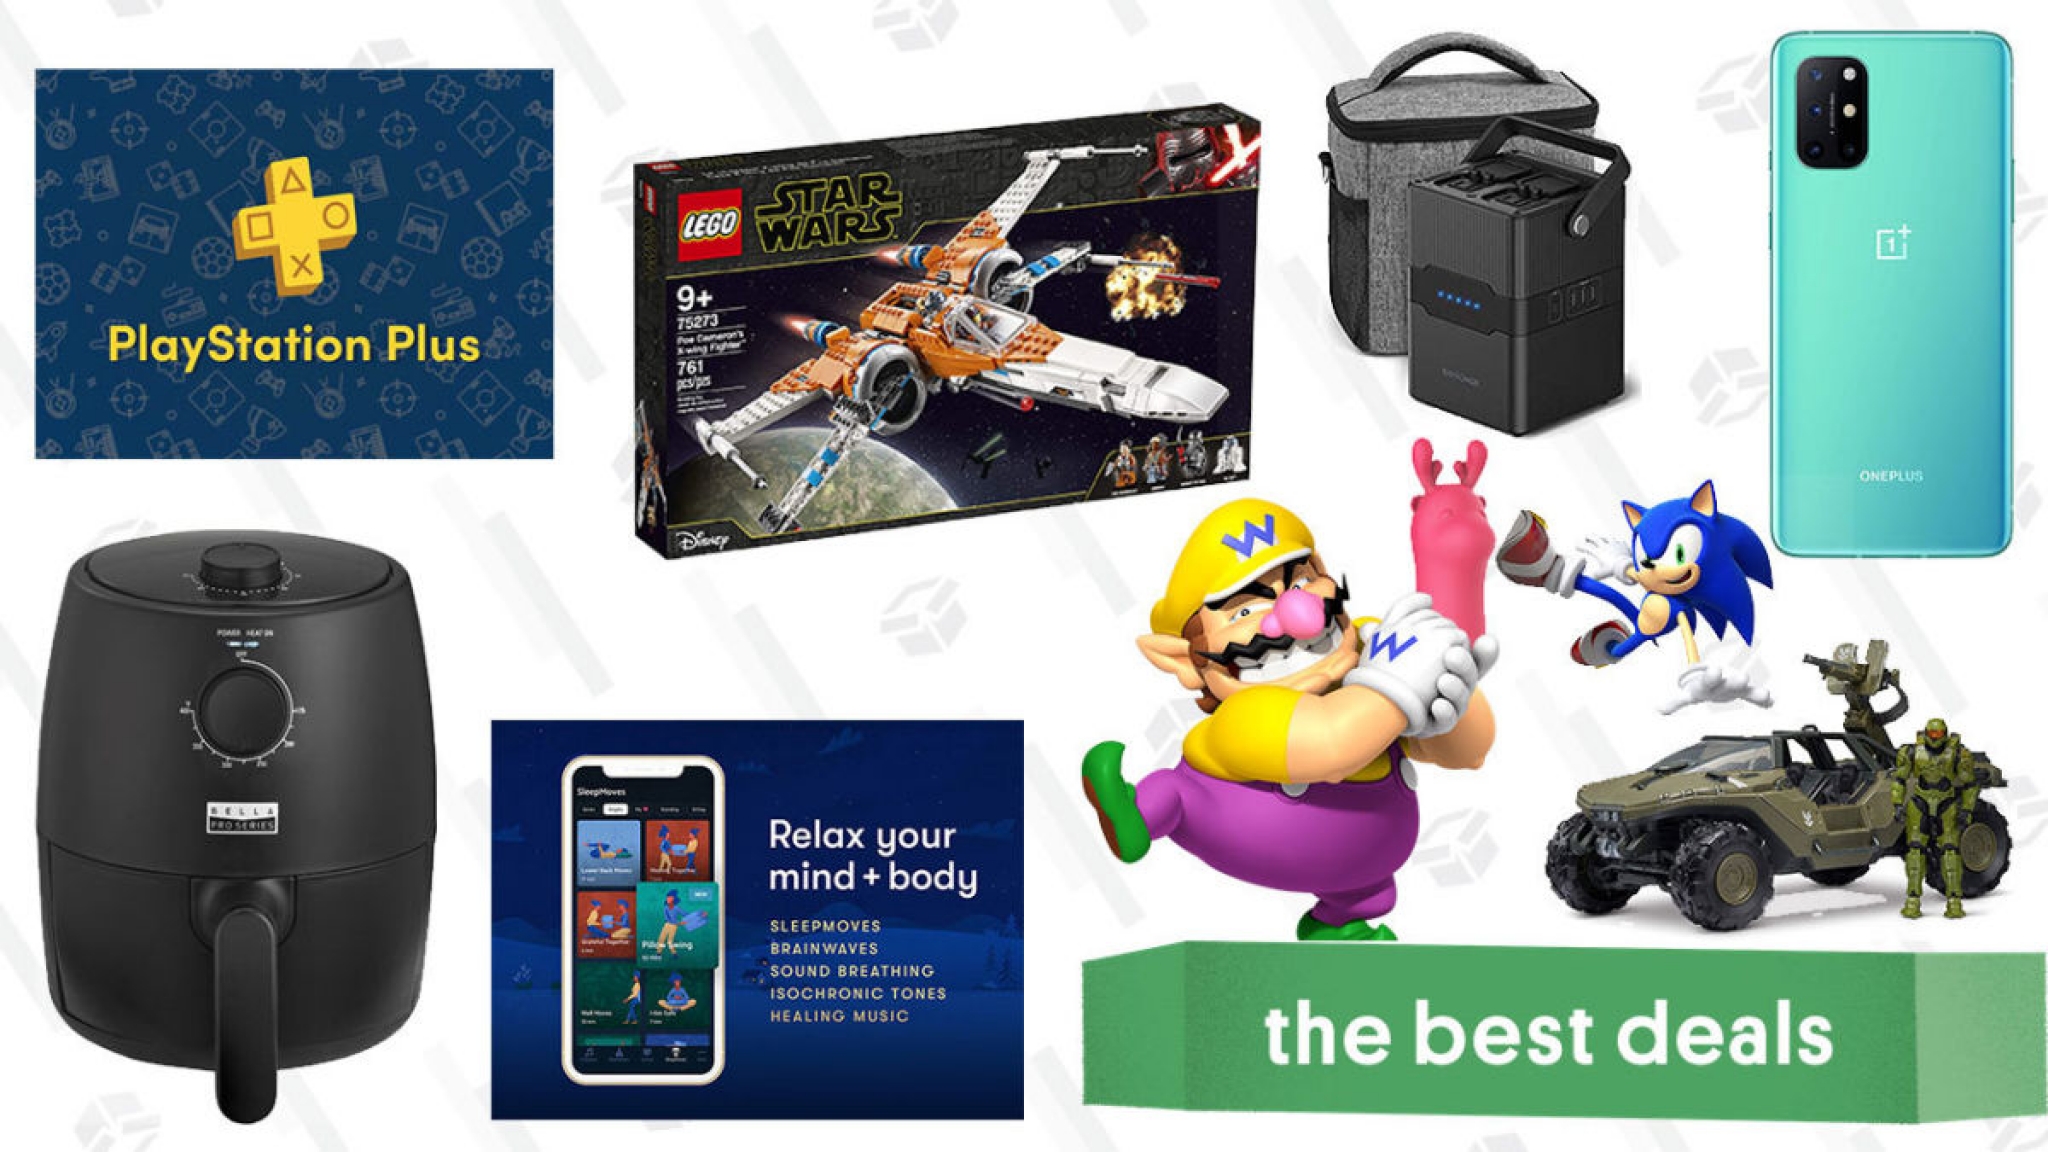 Thursday’s Best Deals: RAVPower Portable Power Station, VPN Unlimited + PlayStation Plus, LEGO Star Wars X-Wing, Bella Air Fryer, Ella Paradis Spring Cleaning Sale, and More